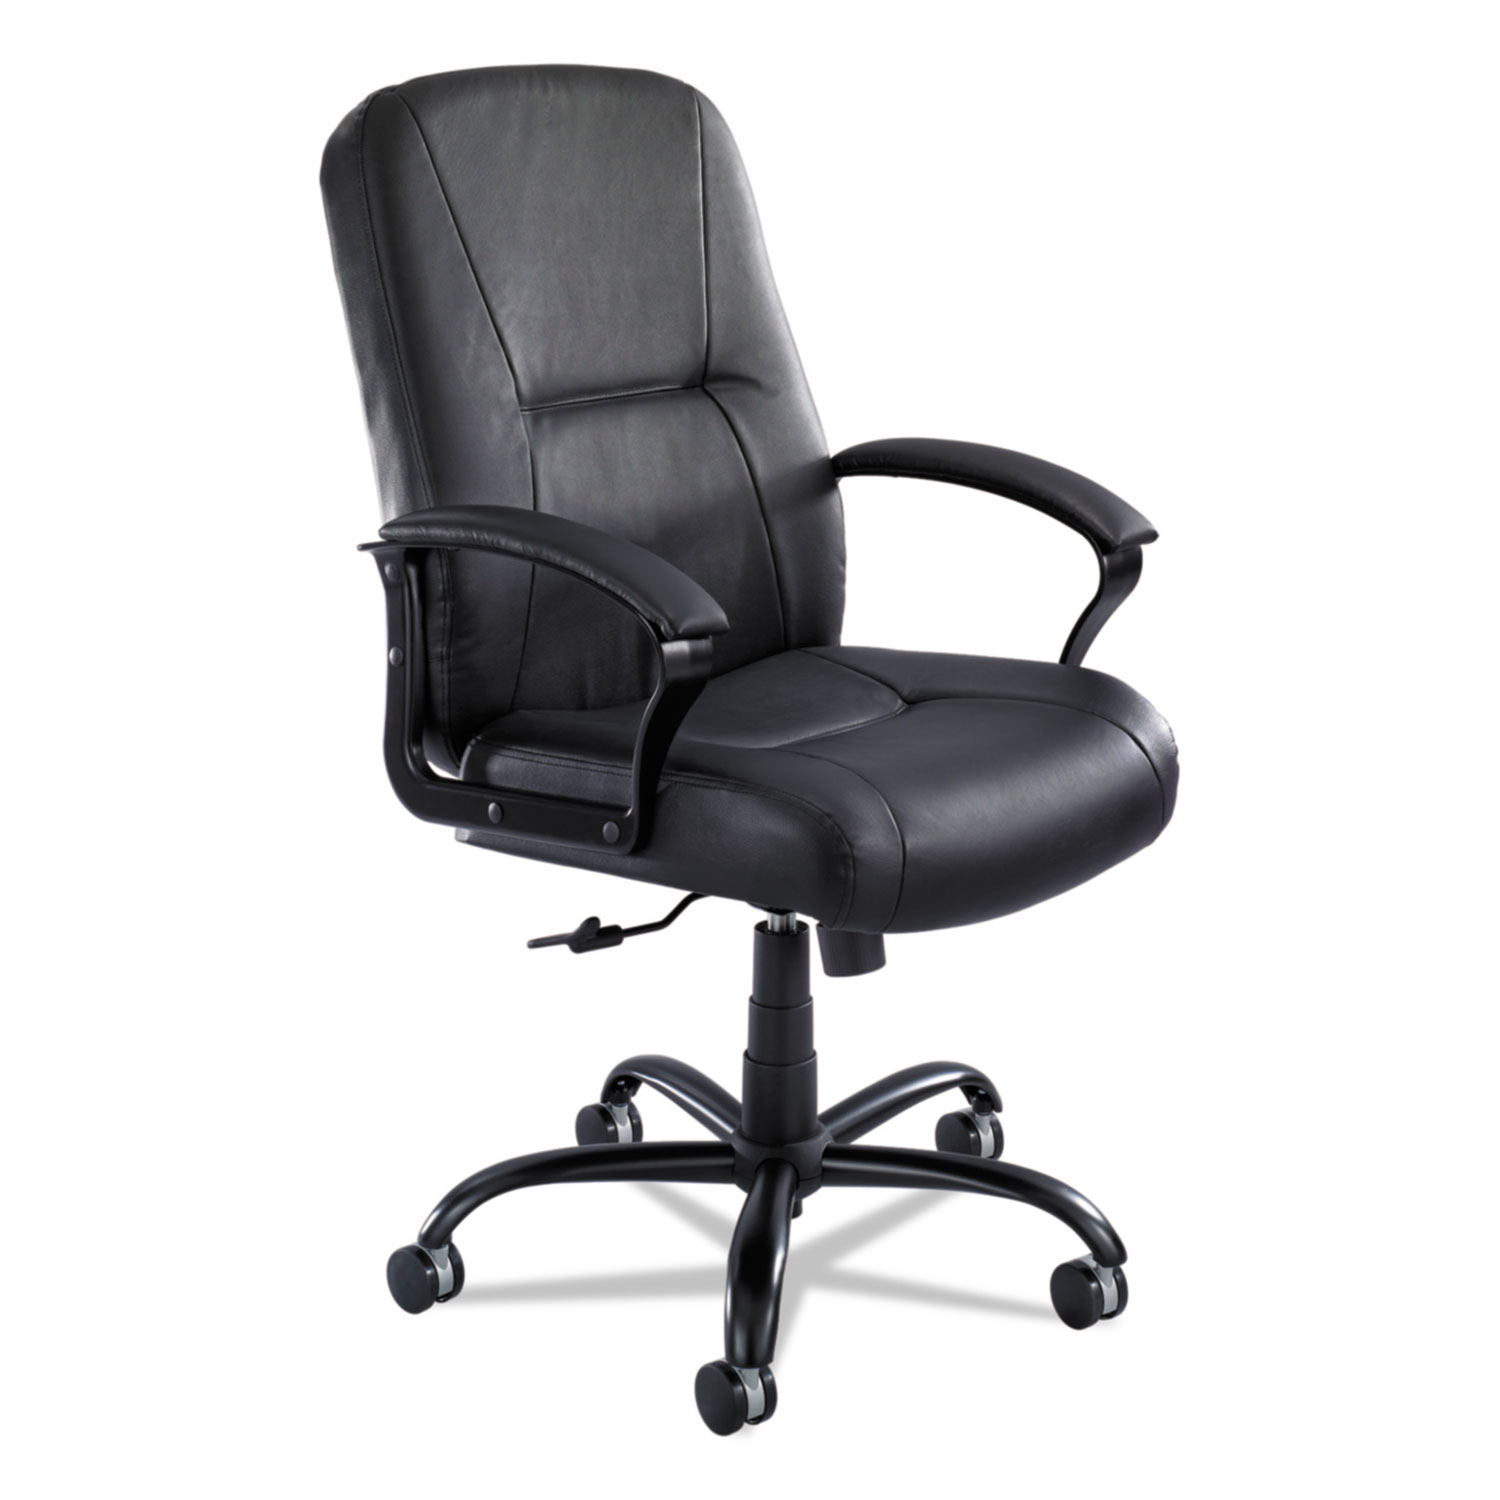 Serenity Big & Tall Leather Series High-Back Chair, Black Leather